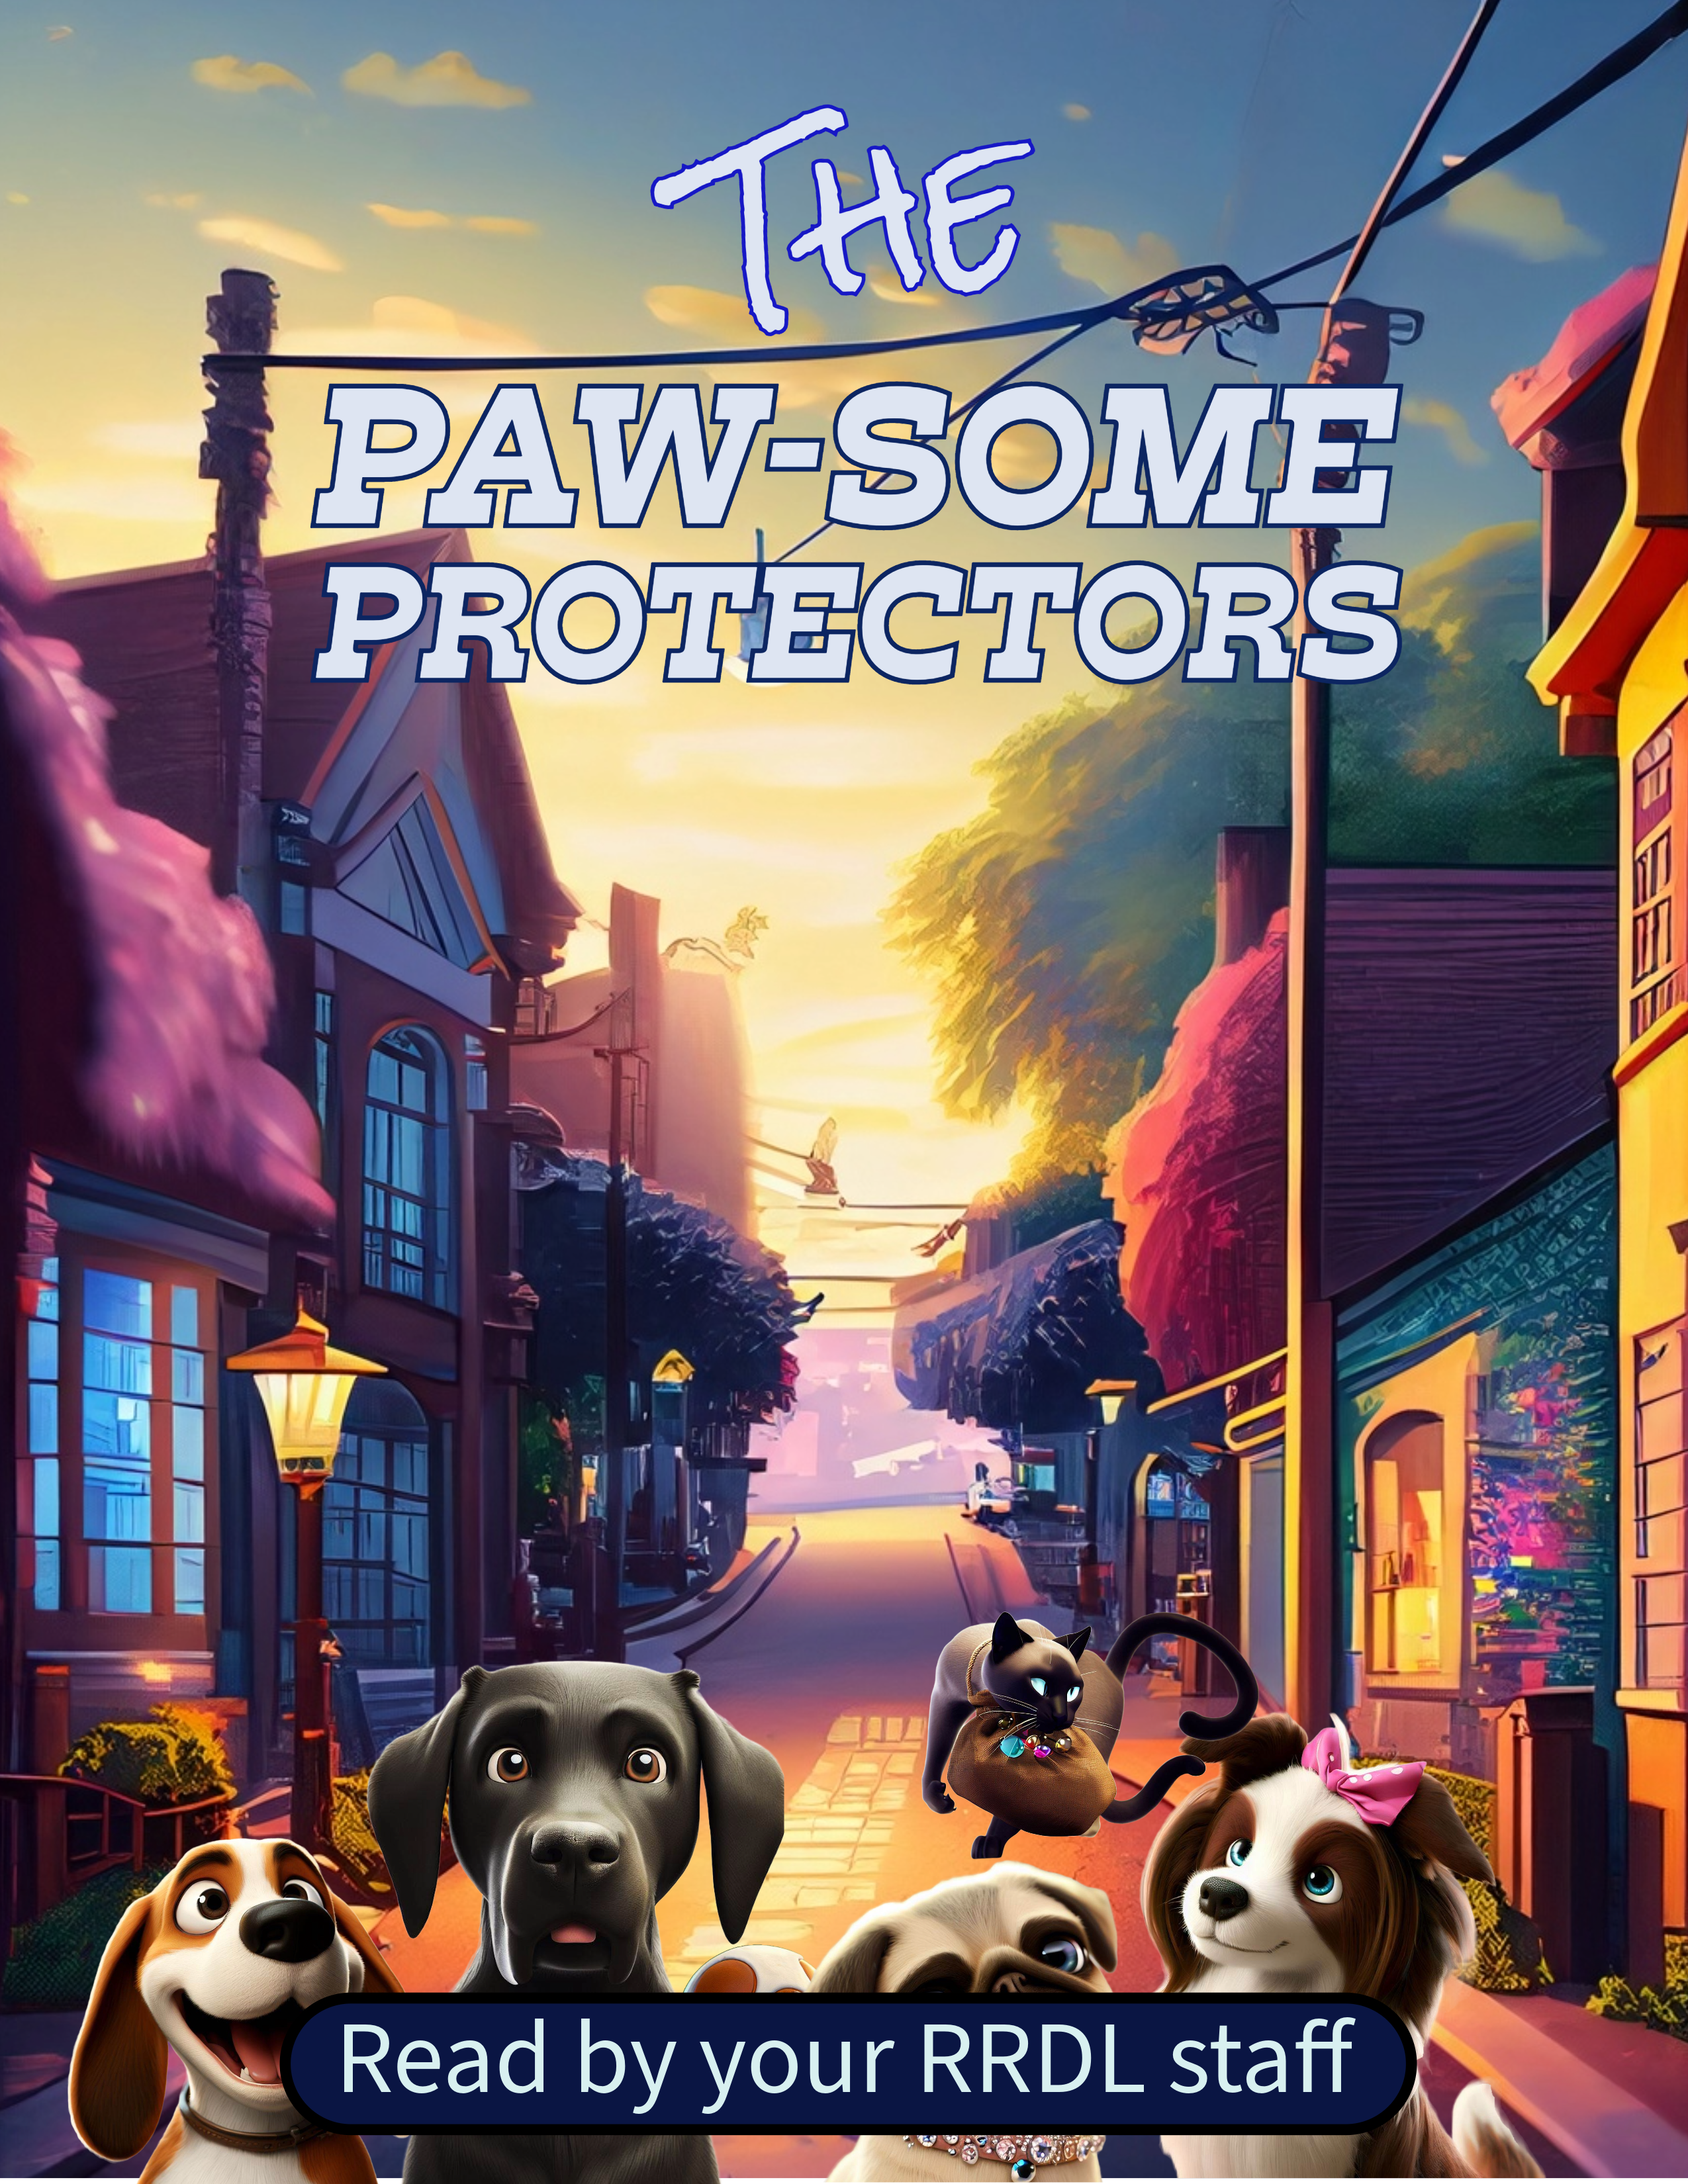 StoryPage - The Paw-some Protectors!